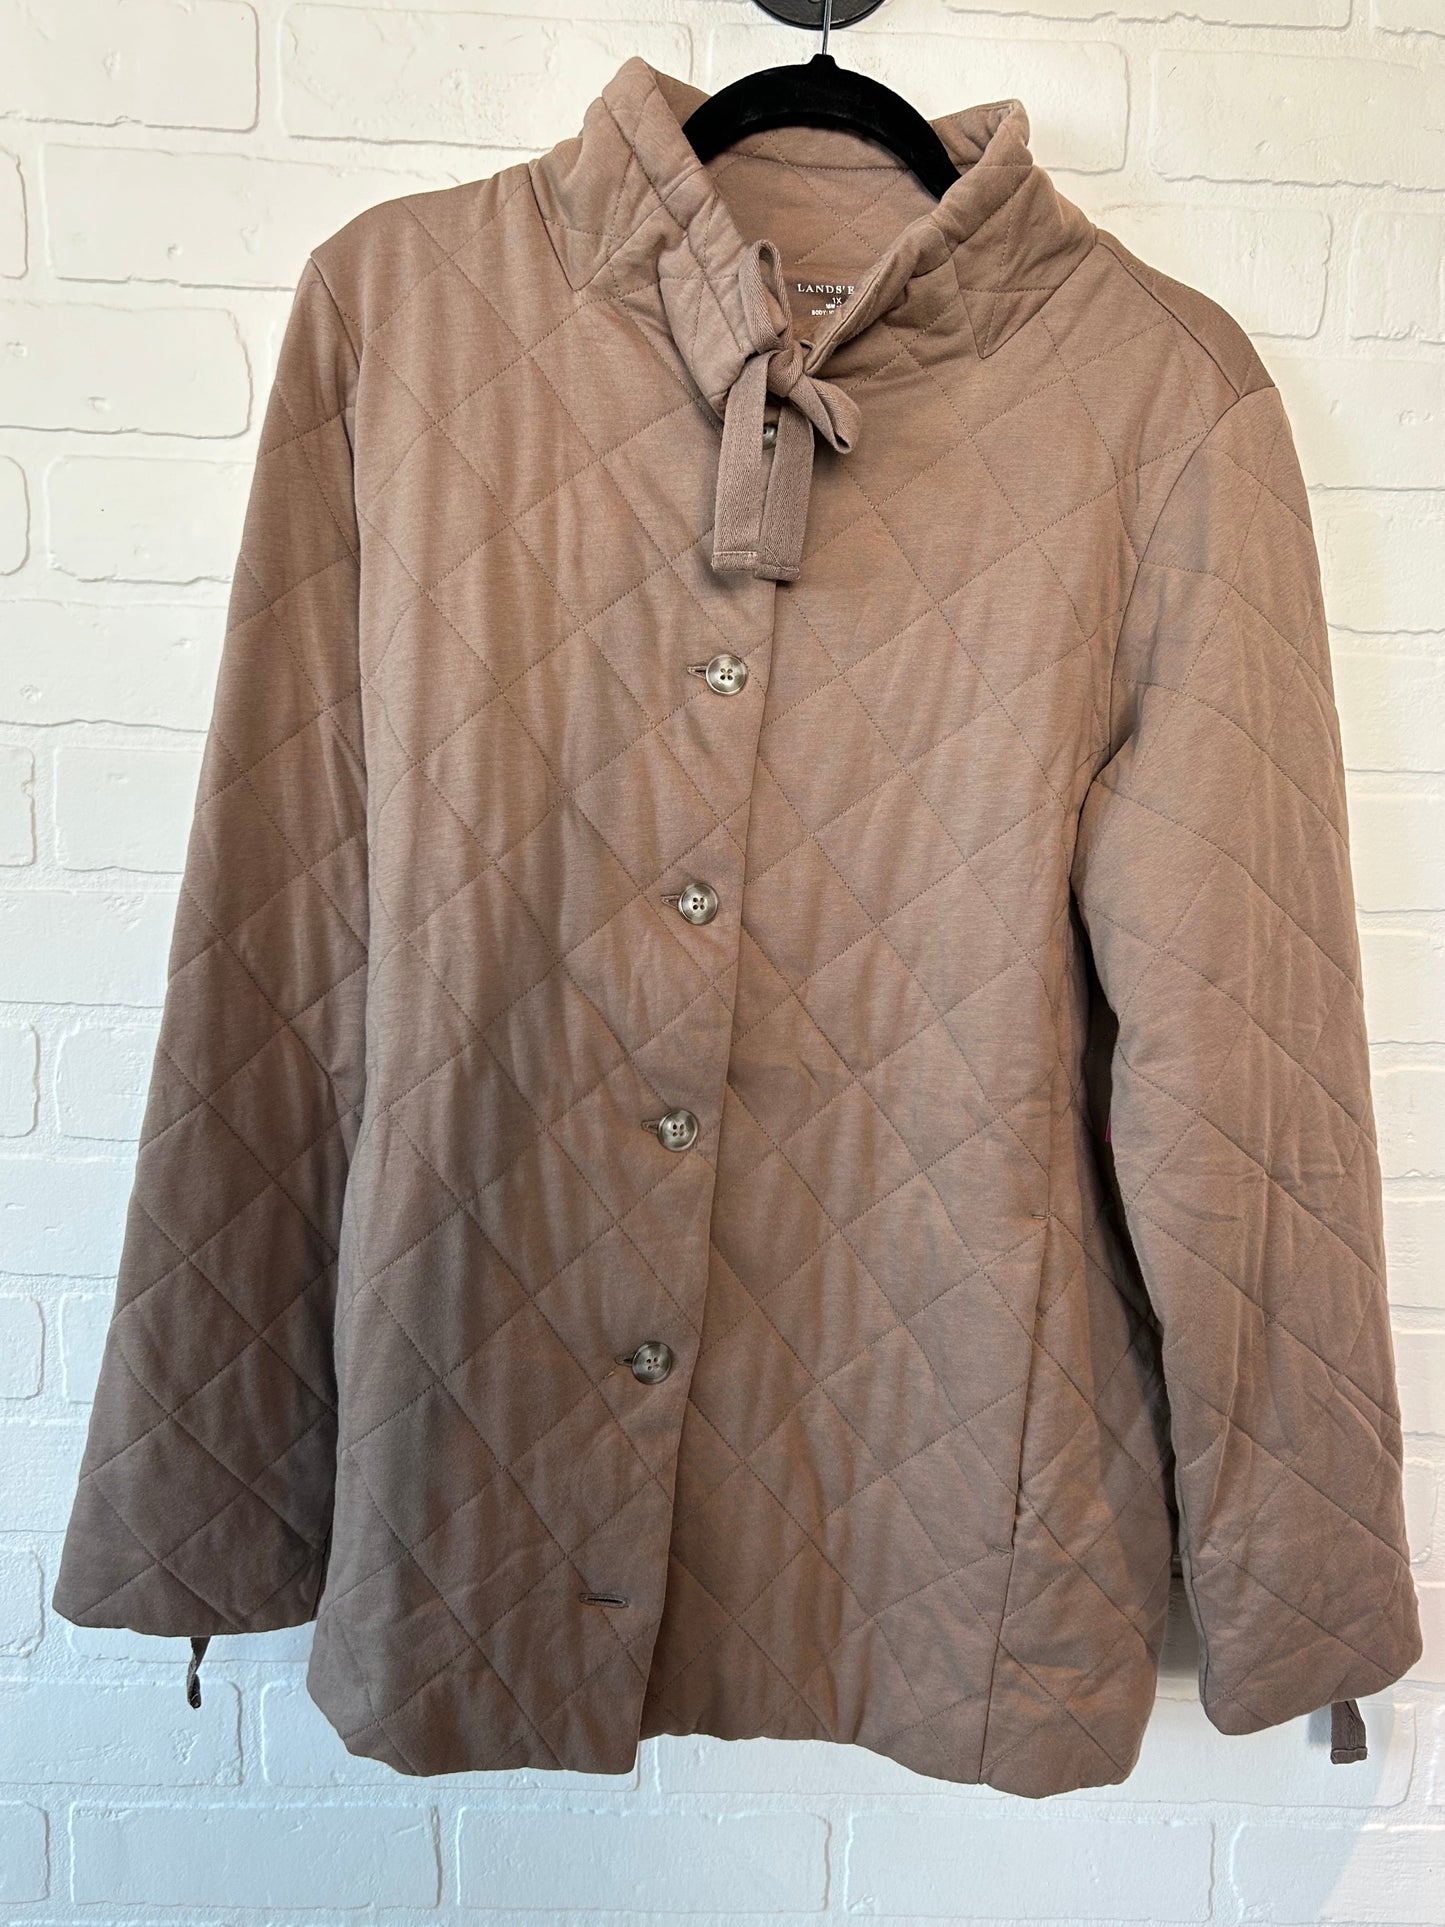 Tan Jacket Puffer & Quilted Lands End, Size 1x